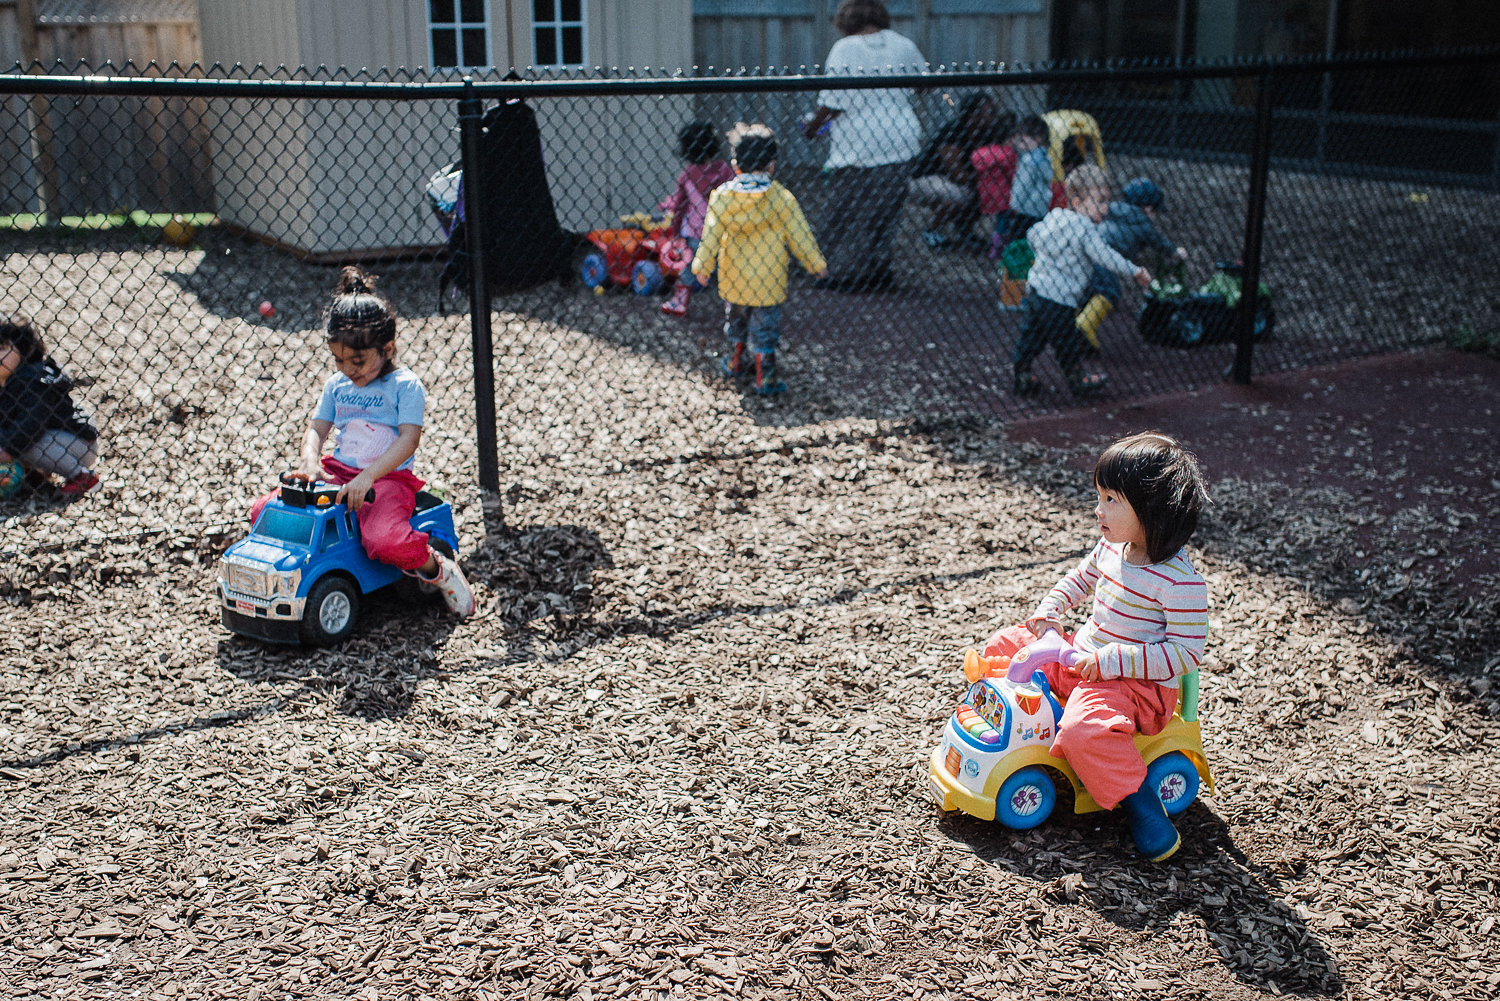 Children are playing in a daycare backyard